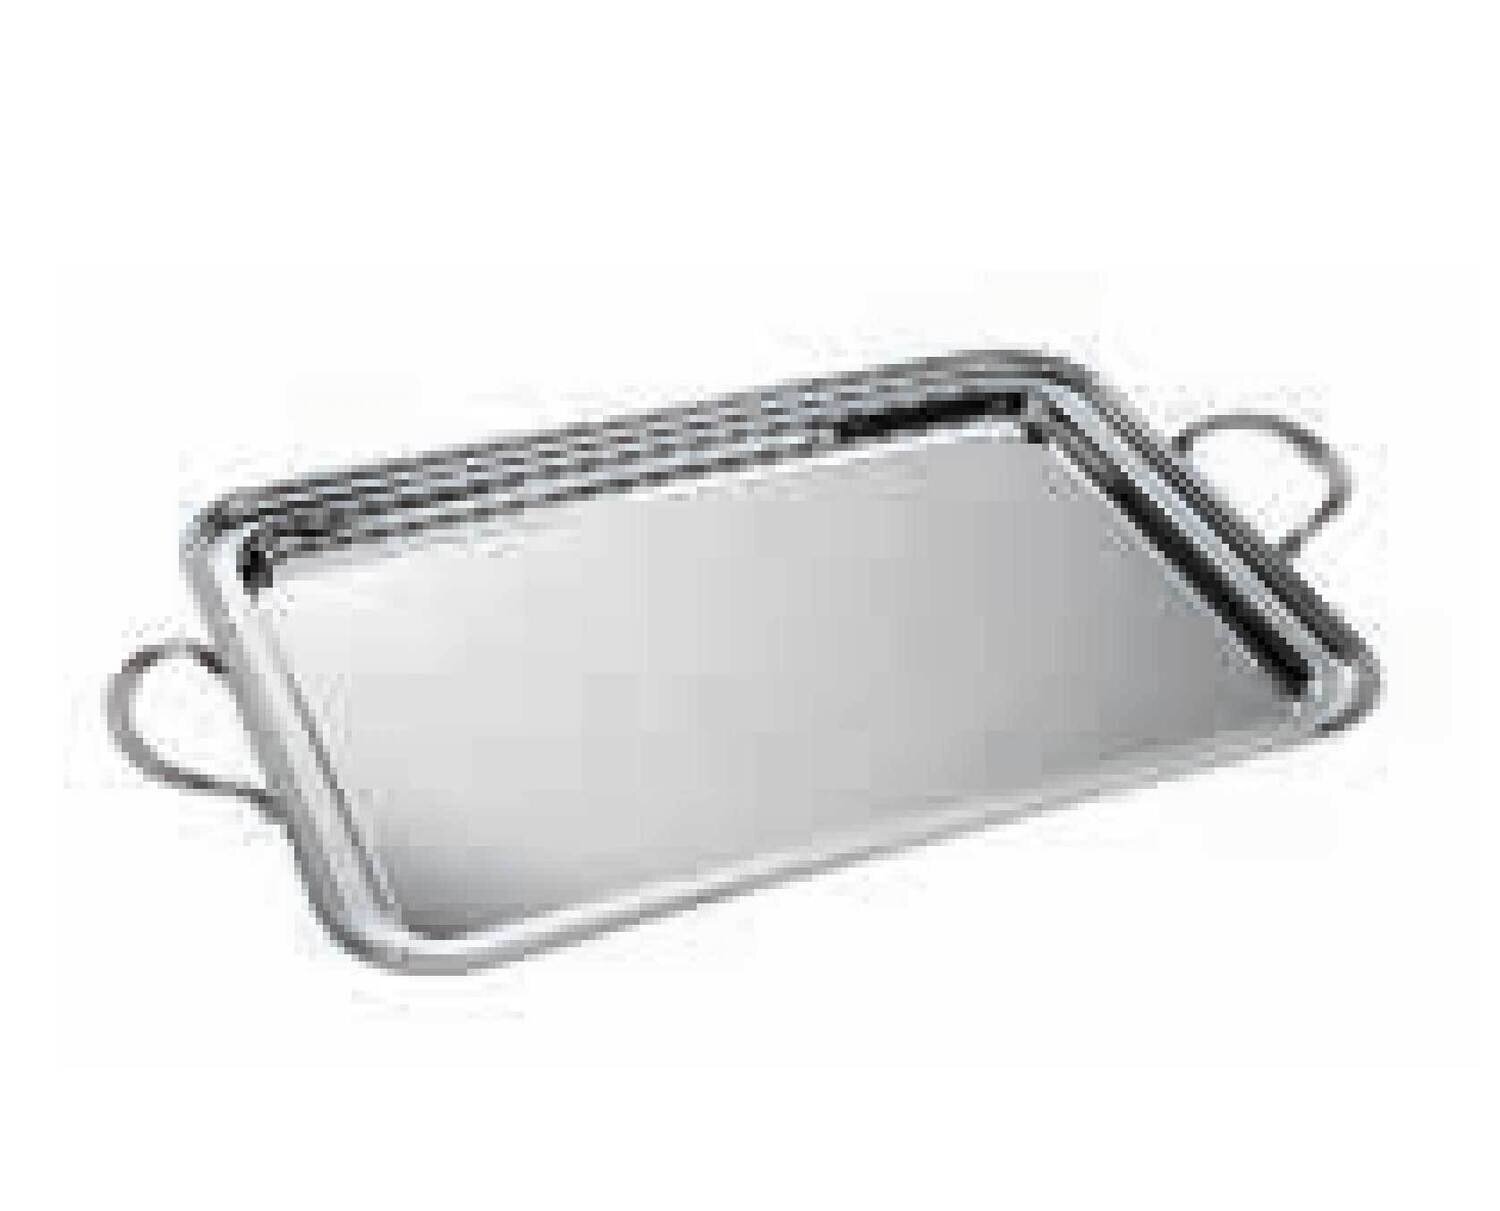 Ercuis Rencontre Rectangular Serving Tray With Handles 15.75 x 10.625 Inch Silver Plated F522450-40